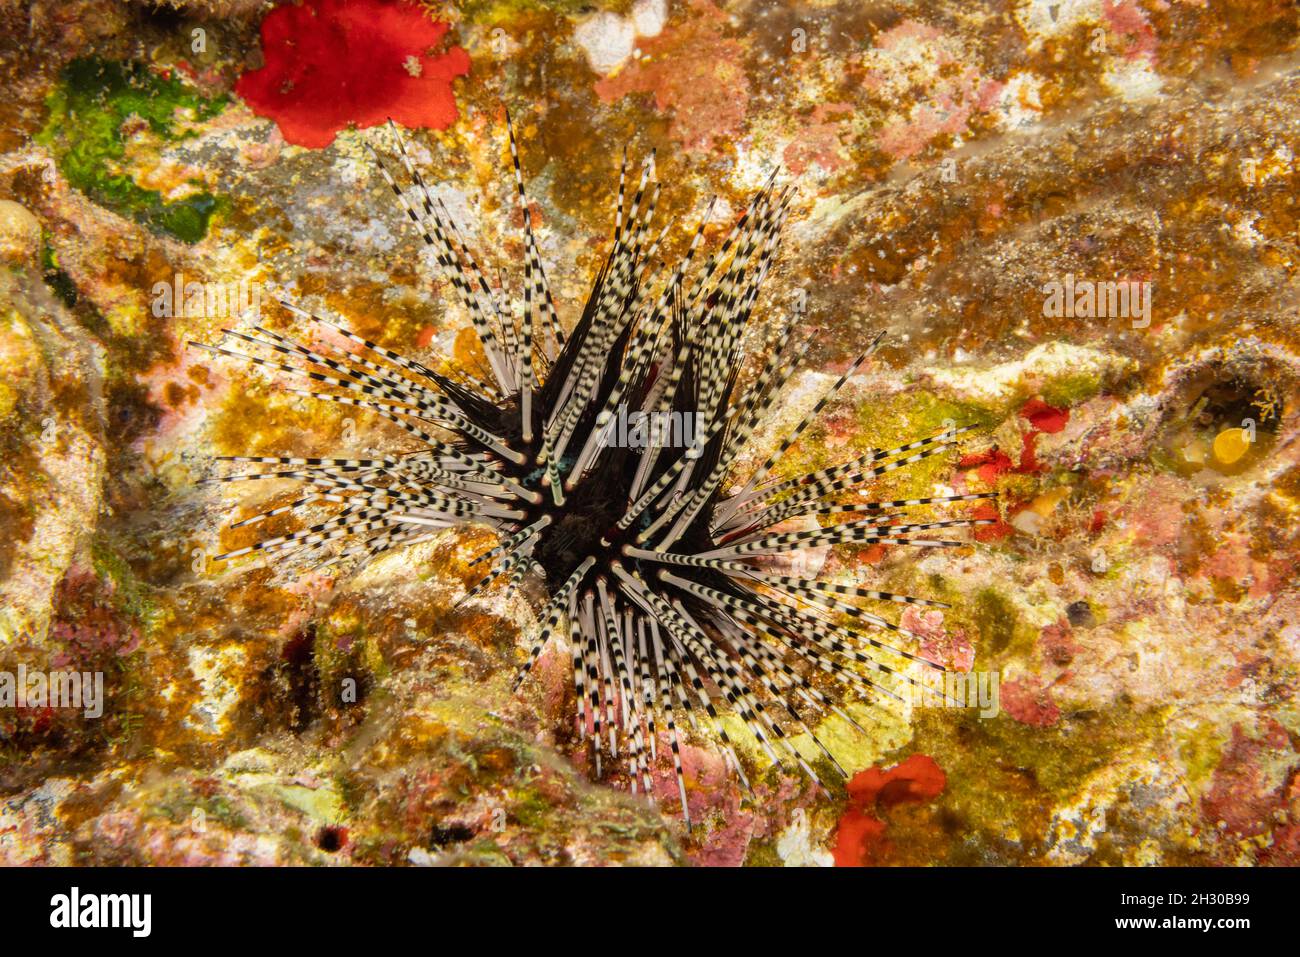 The banded sea urchin, Echinothrix calamaris, is the most common long spined urchin in Hawaii. Stock Photo